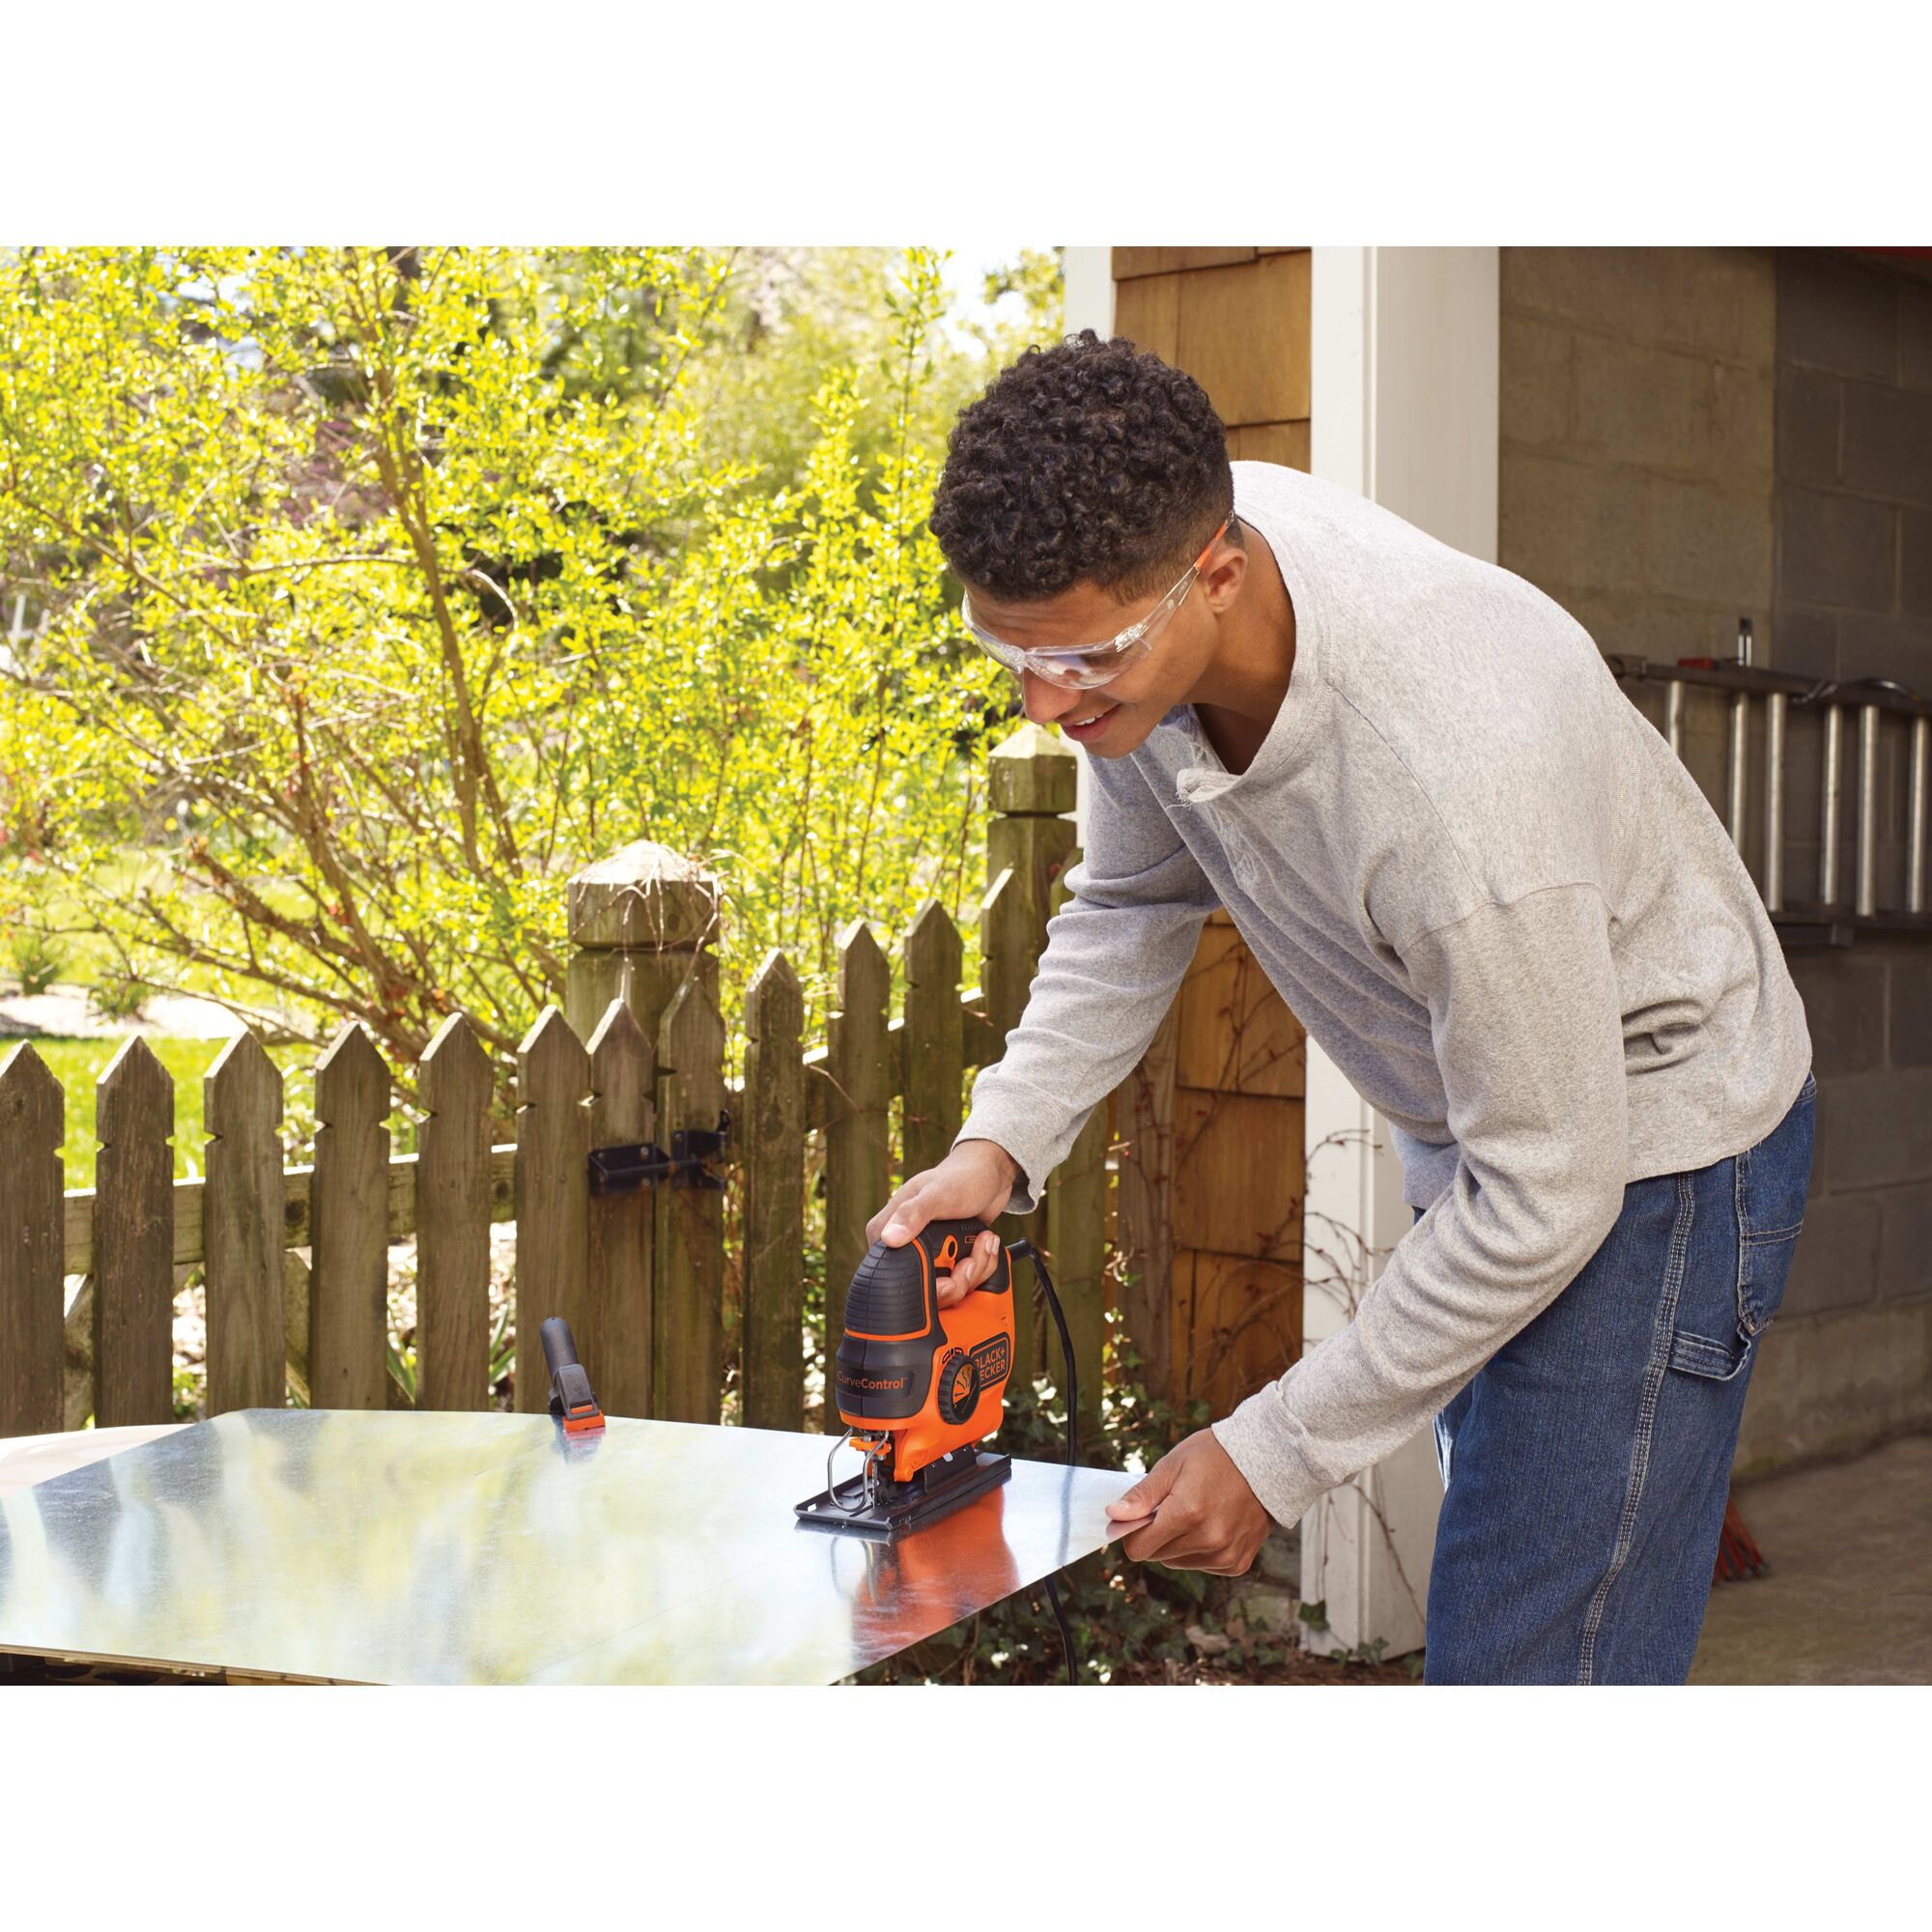 Black and decker jig saw smart select being used by a person.